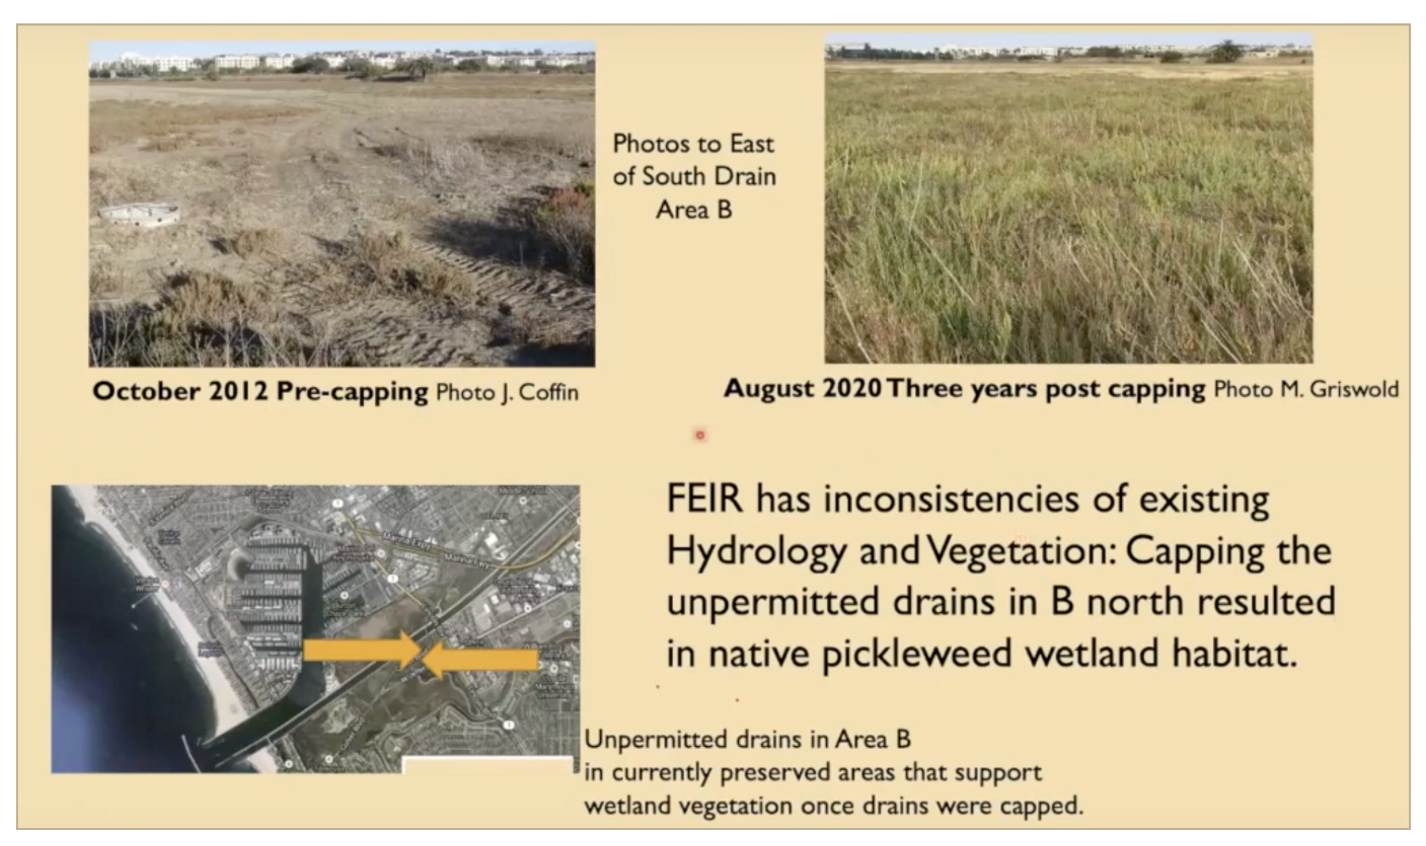 letter.picture2.FEIR_.Inconsistencies.Hydrology.Vegetation.Native.Pickleweed.freshwater.wetland.habitat.from_.capping.unpermitted.drains.2012.image_.compare.2020.image_.png